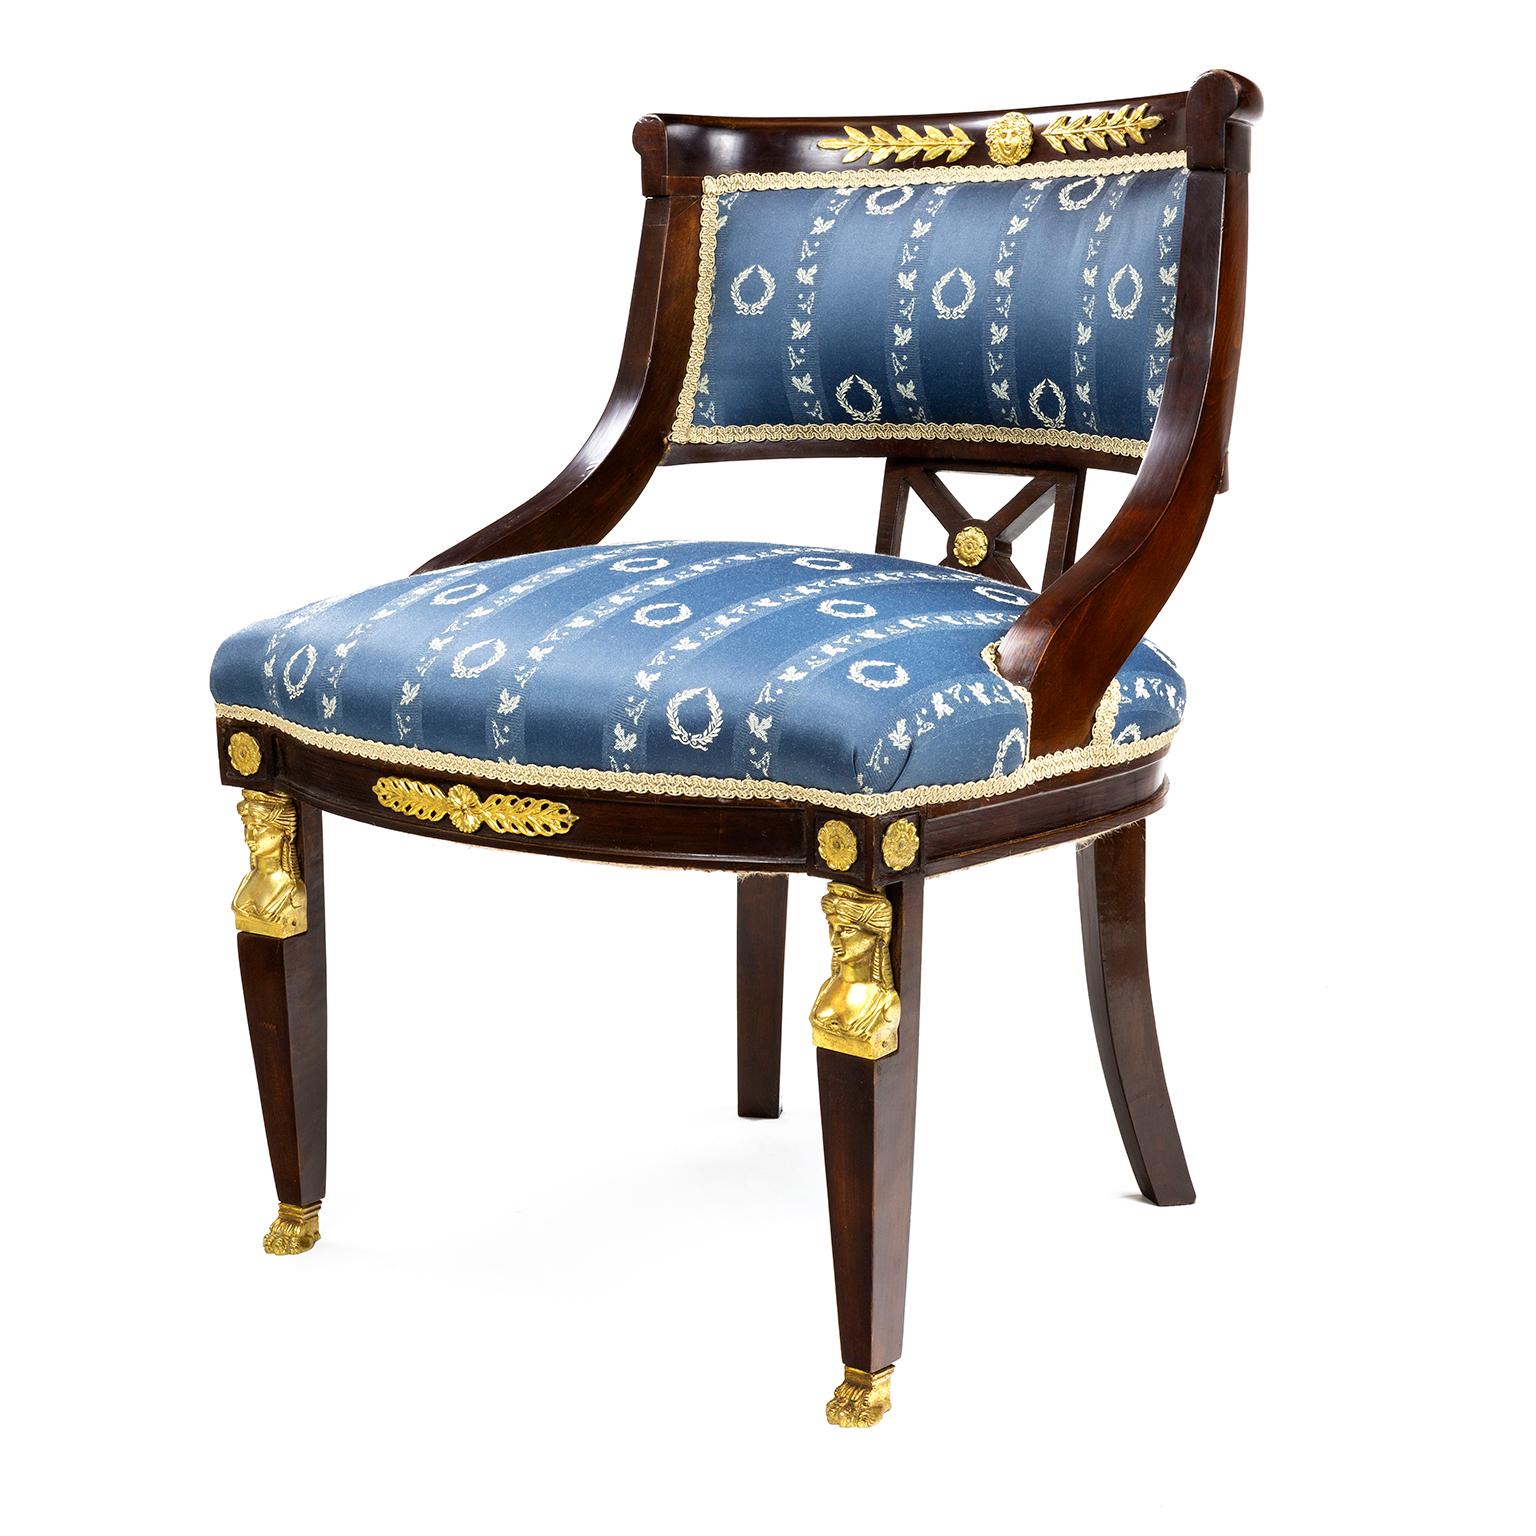 A French 19th century Empire style chair in mahogany with brass laurel wreaths, with brass anthemion mounts below brass rosetts at the top of the tapering front leks, down to brass feet with outswept legs to the backs.

The chair is in very good